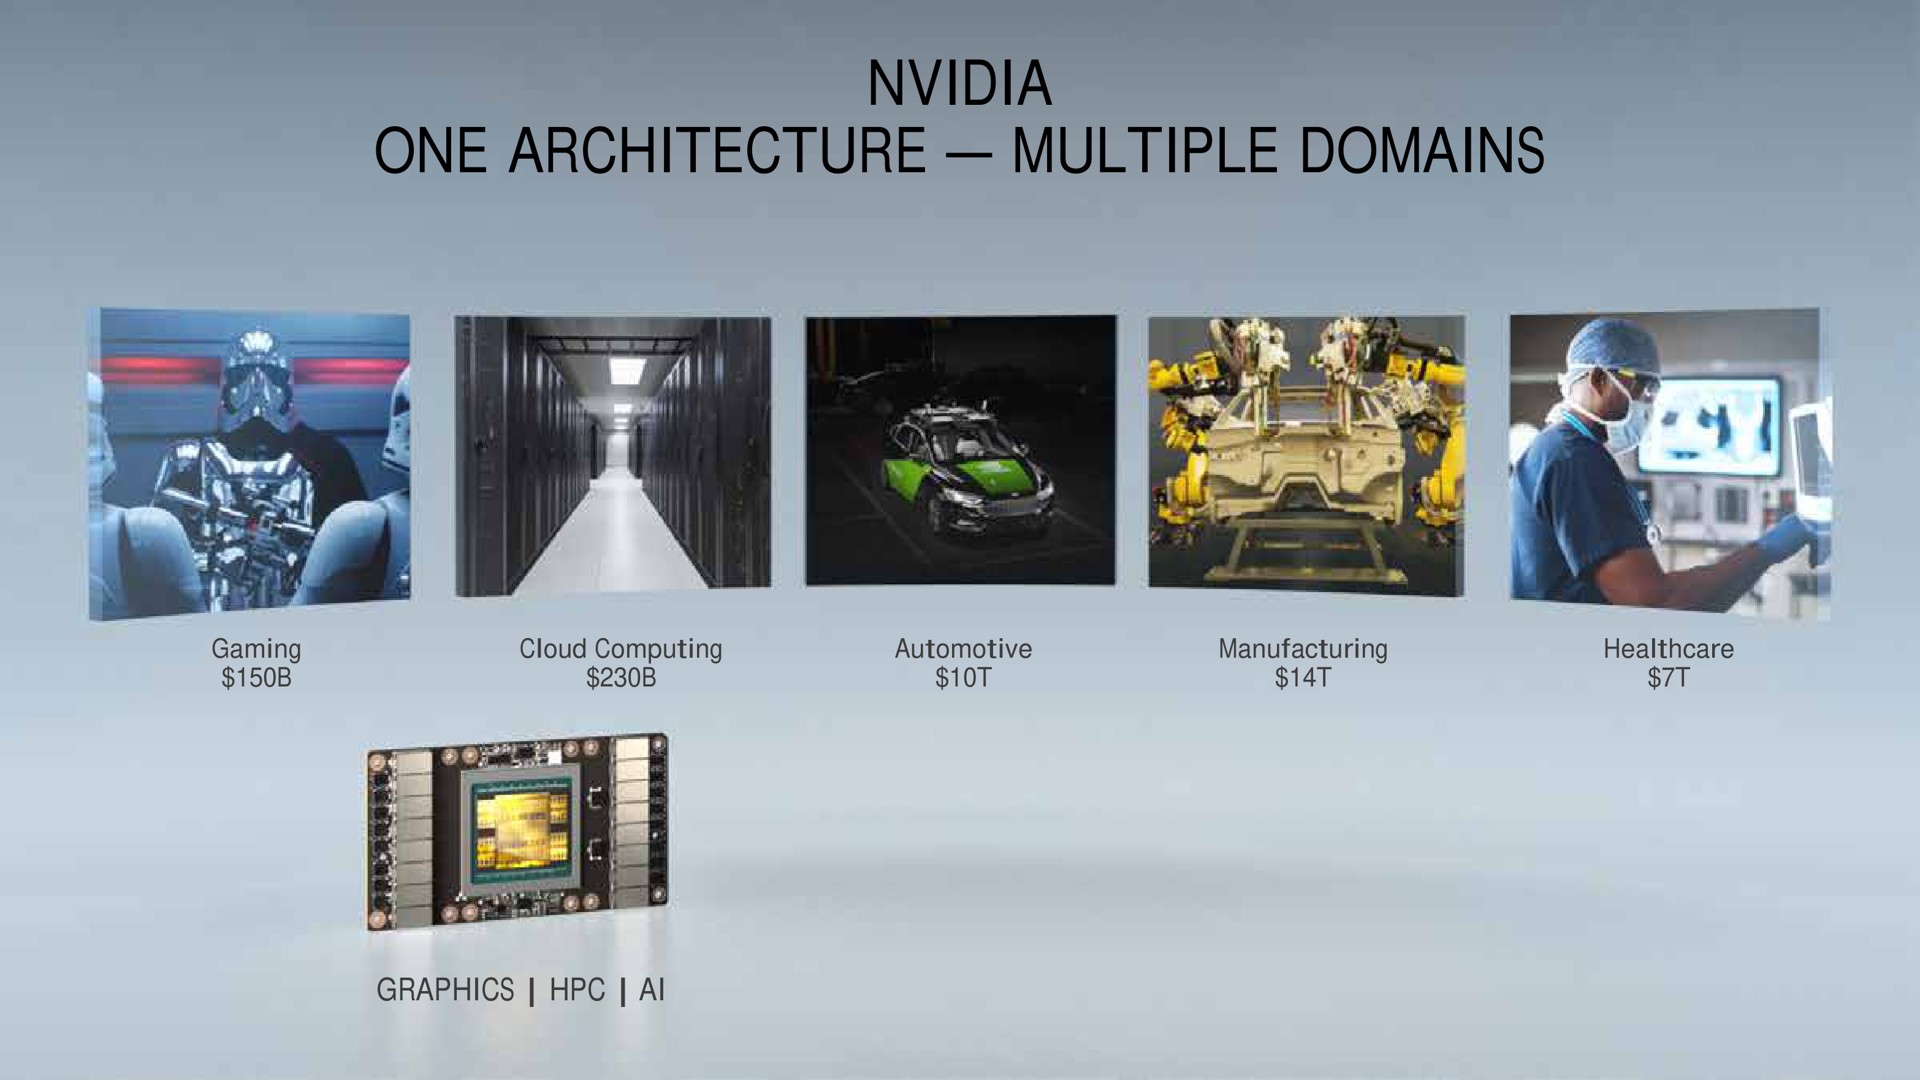 one architecture multiple domains | NVIDIA